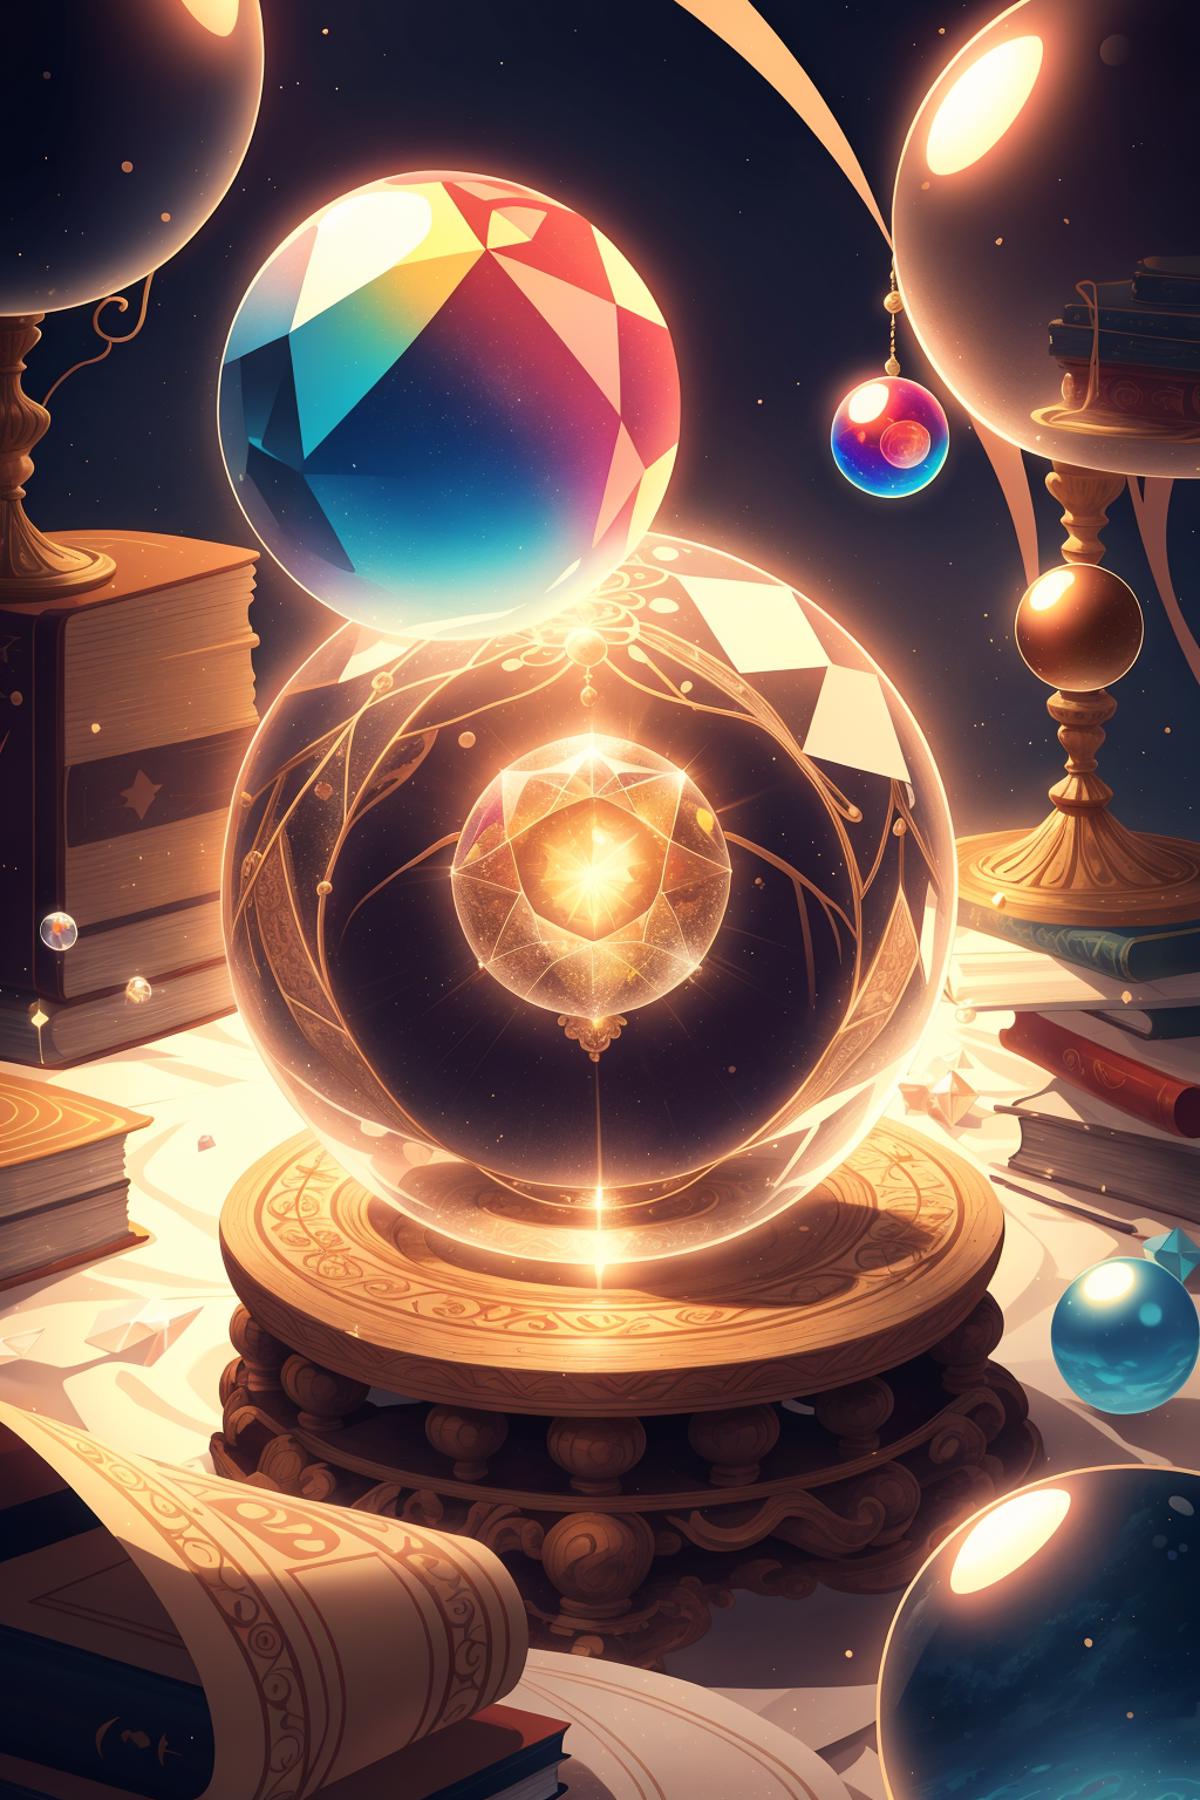 Orbs and Crystal balls, and more Orbs - fC 球体 image by fitCorder